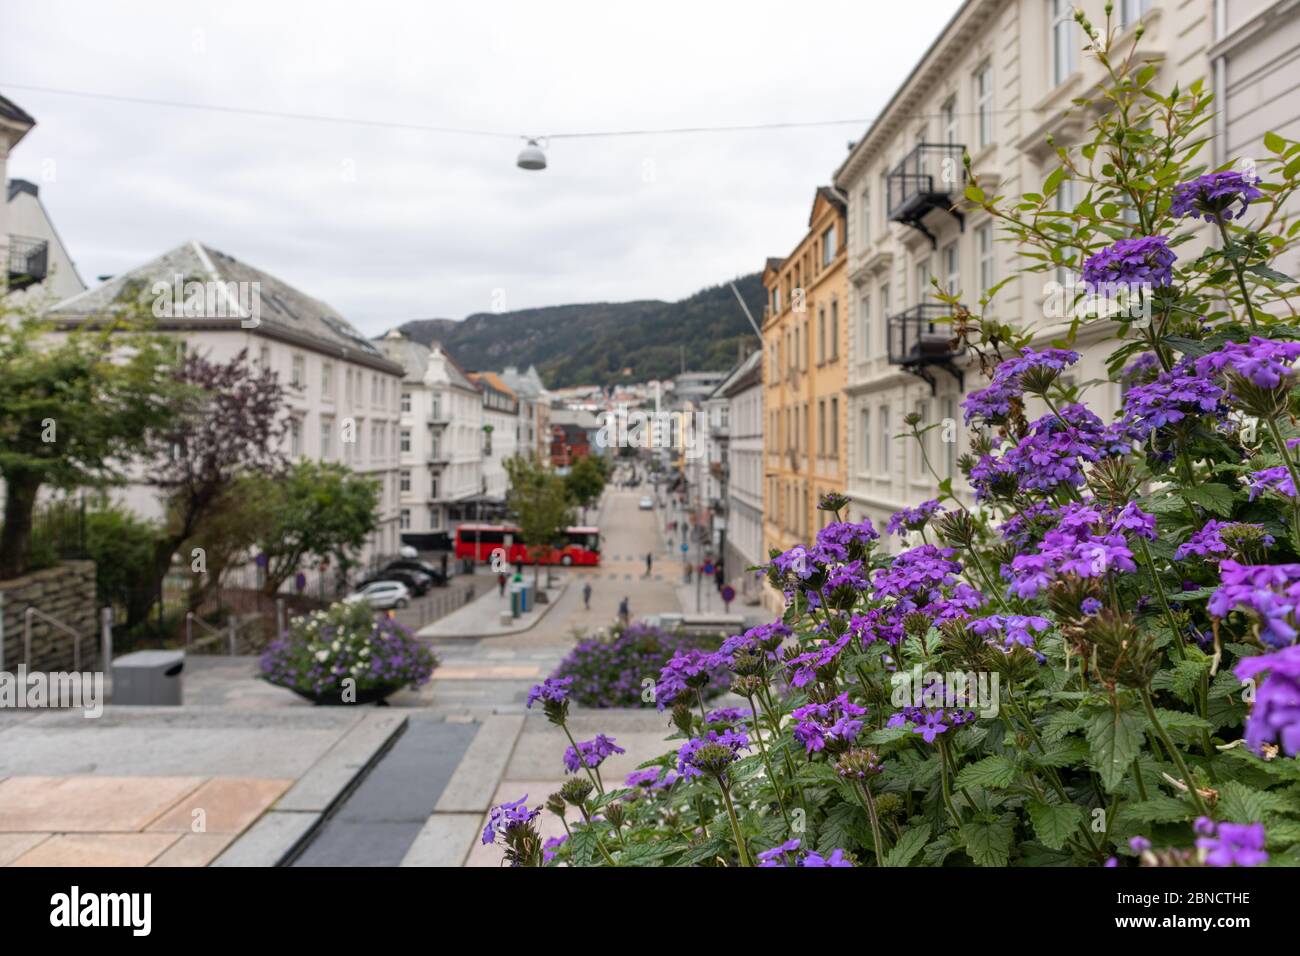 Quiet cascade streets of Bergen, Norway. Colorful phlox purple small flowers on way from St. John's Church to old city. Blurred houses in background Stock Photo